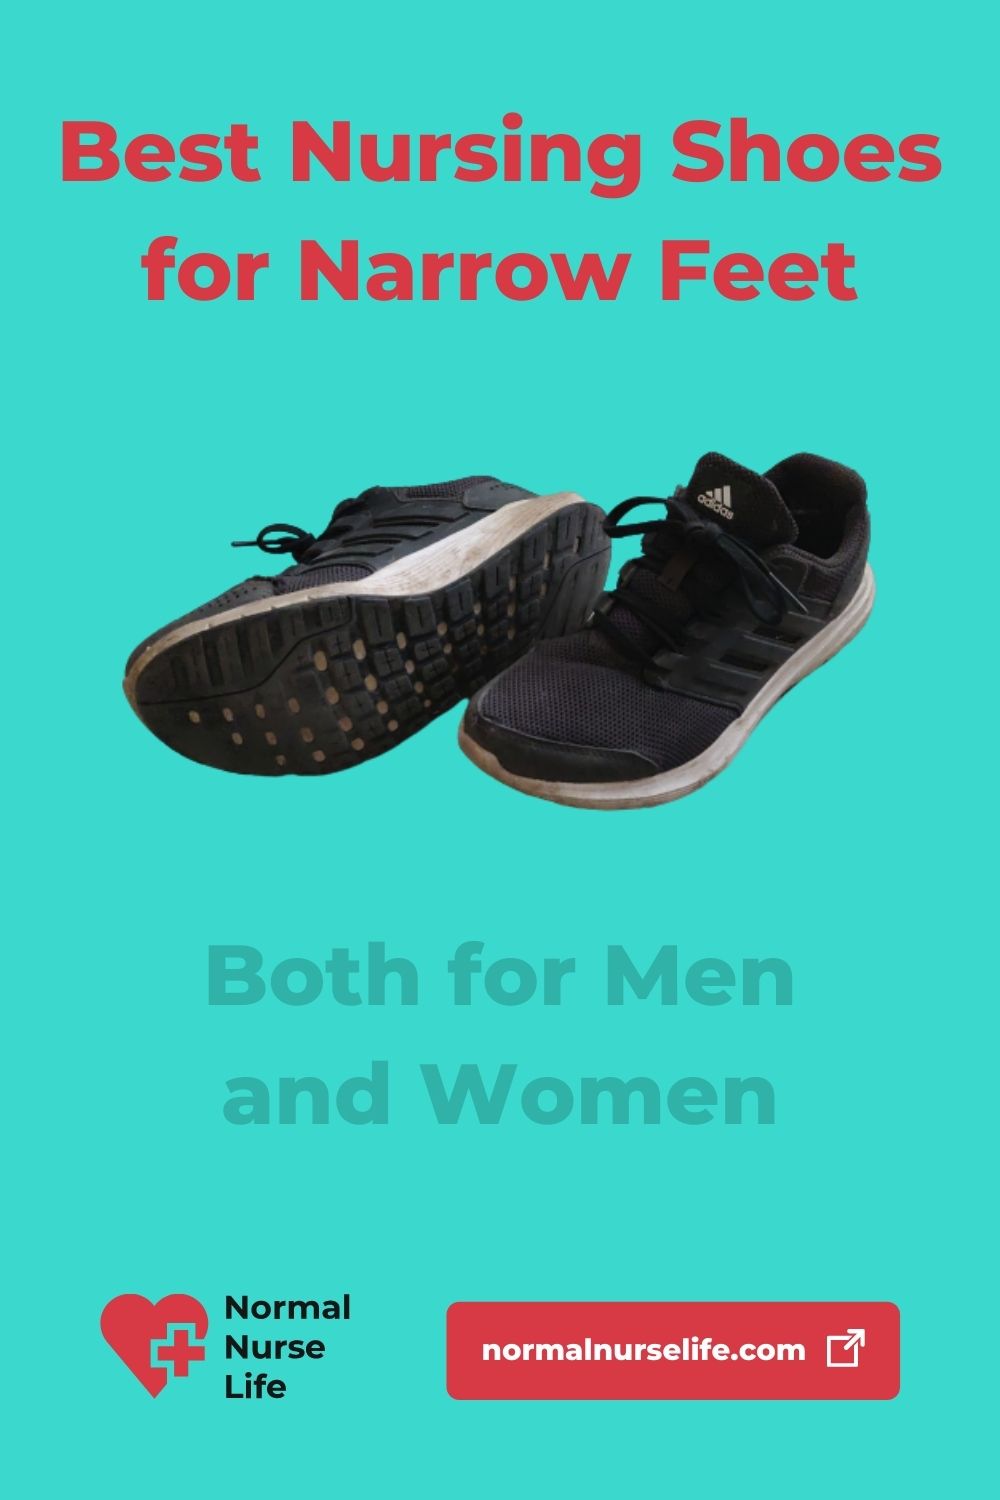 Best Shoes for Nurses with Narrow Feet